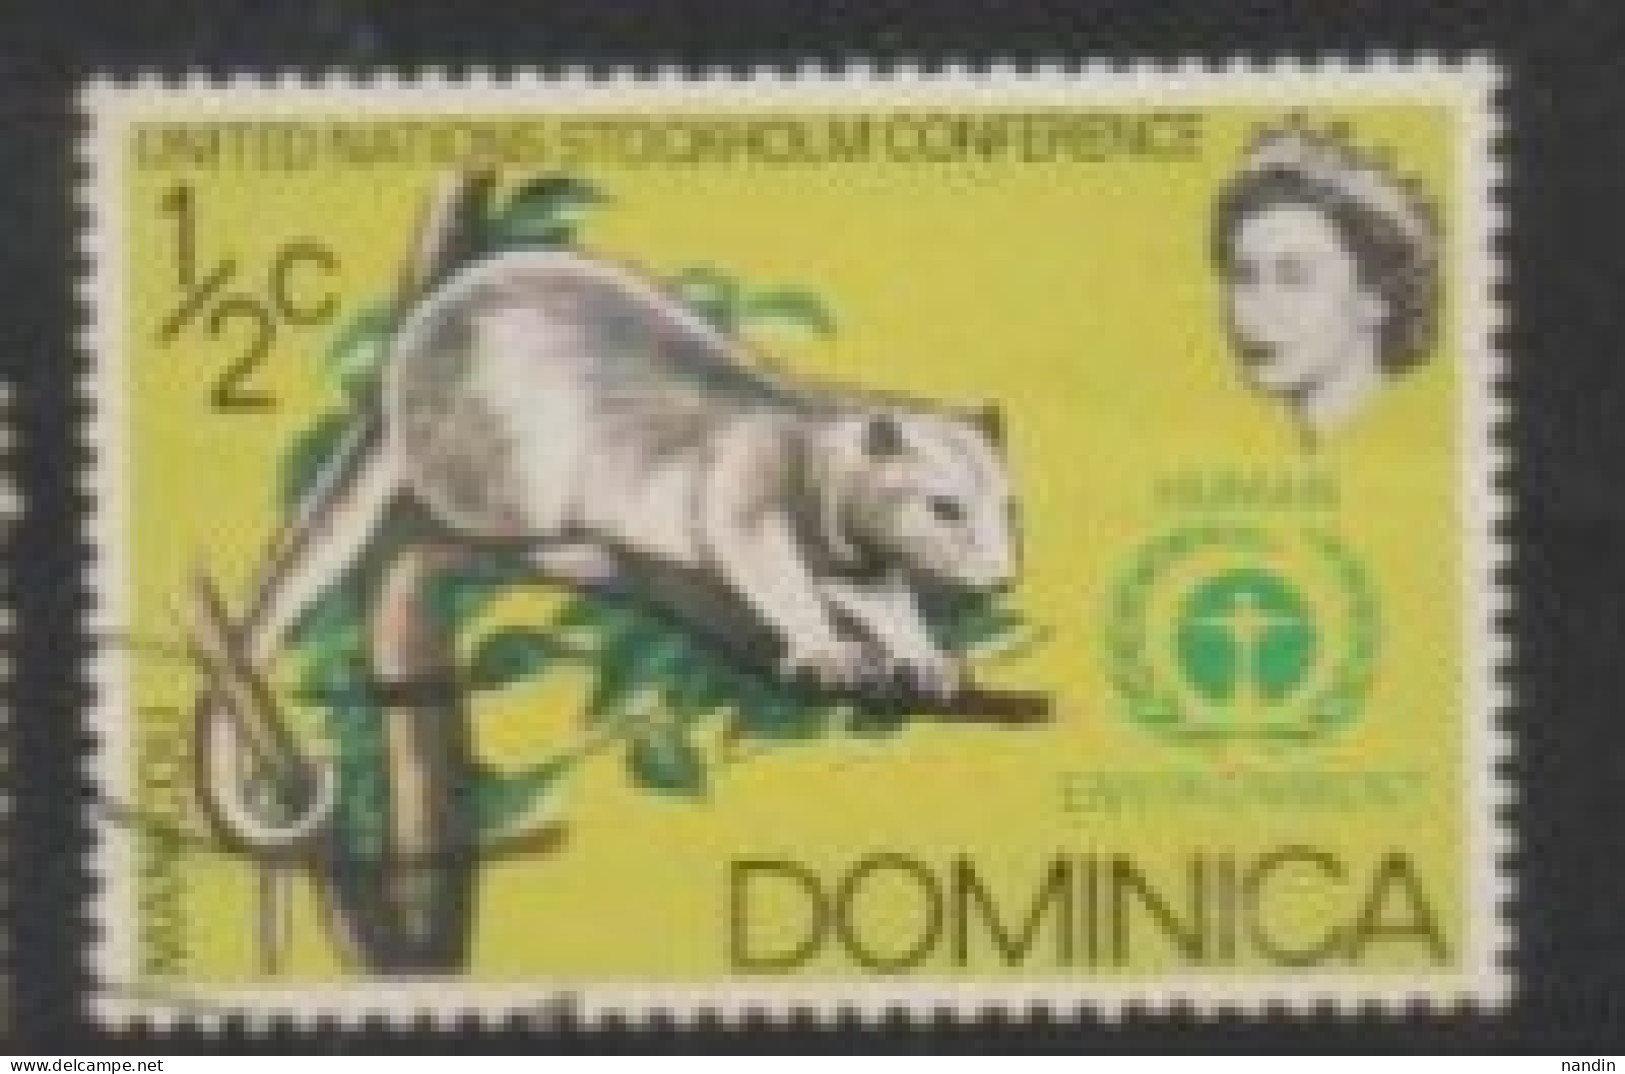 1972  DOMINICA STAMP (USED) On WILD LIFE/Didelphis Marsupialis,The Common Opossum(issued OnConference On The Human Envir - Rongeurs